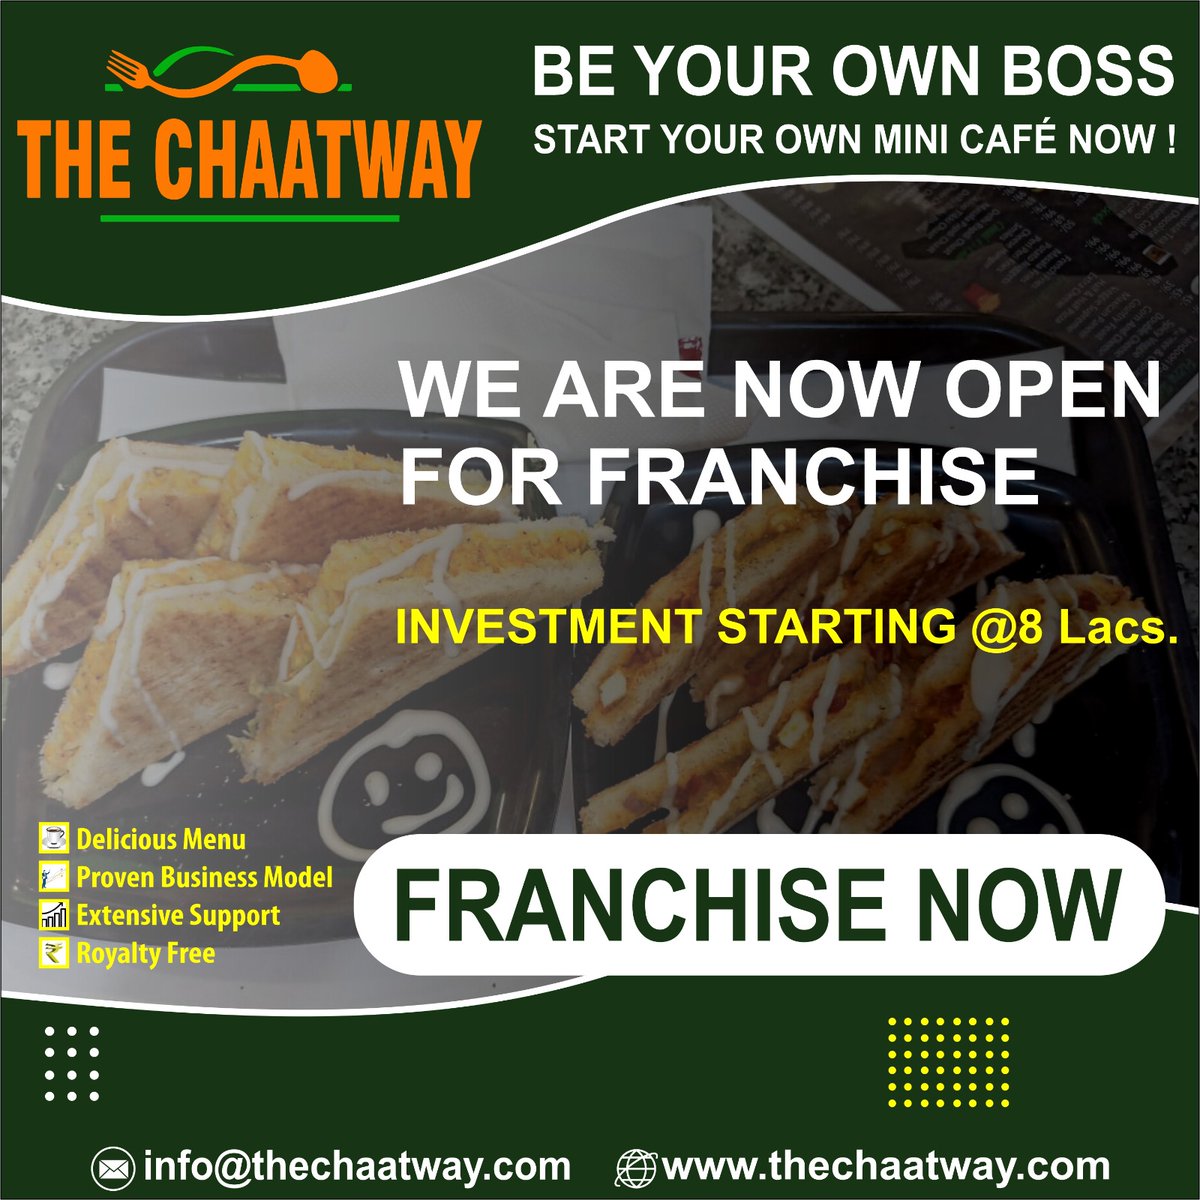 If you want to start Chaatway food franchise, then you need a total investment of 10 lakhs😊
.
#thechaatway #foodlover #panipuri #pastalover #foodies #chaat #newbusinessalert #BusinessNews #indianfood #panindia #foodservice #smallbusiness #hygienicfood #india #businesstips #assam